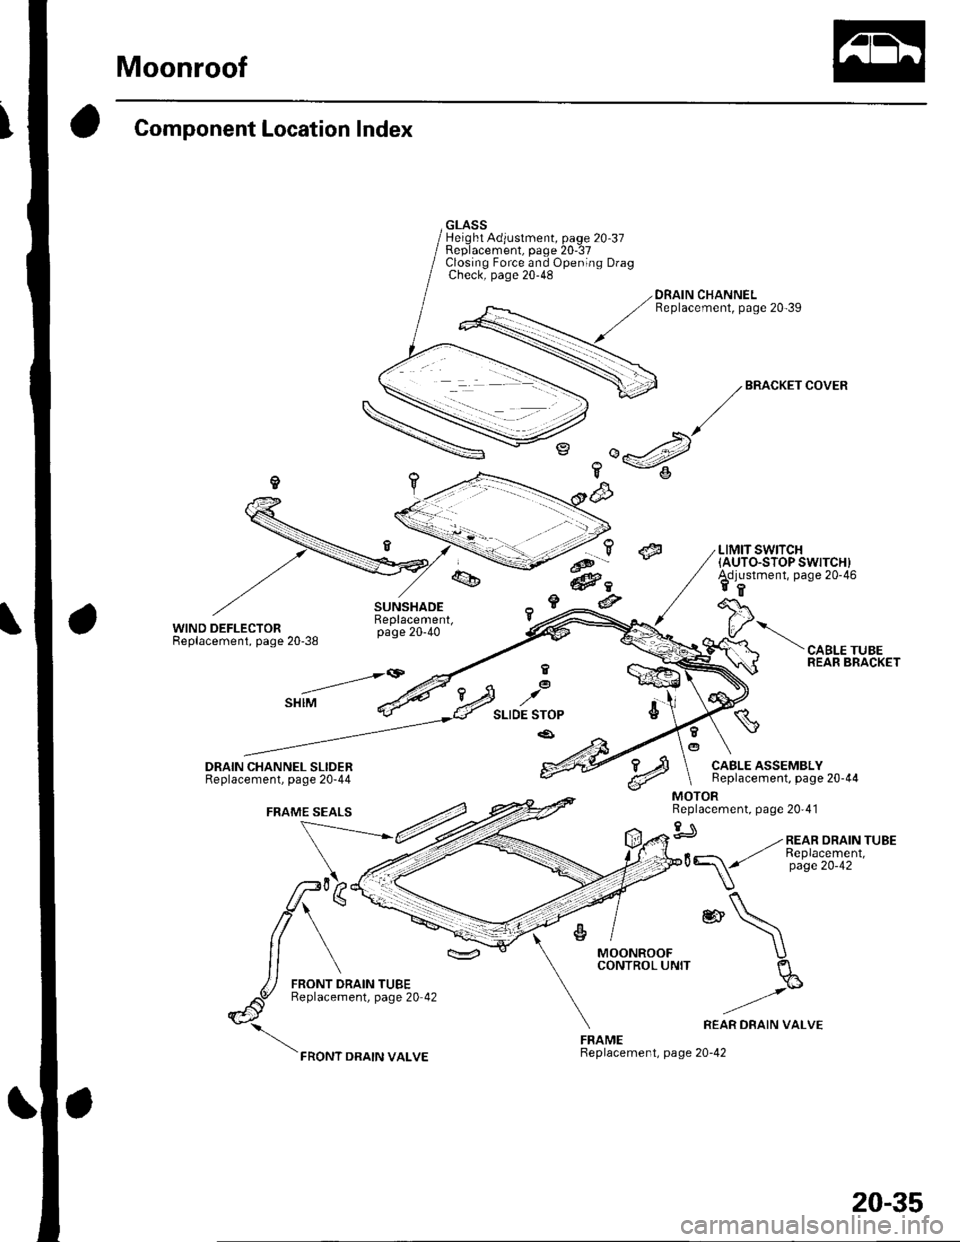 HONDA CIVIC 2003 7.G Workshop Manual Moonroof
Component Location Index
WIND DEFLECTORReplacement, page 20-38
GLASSHeight Adjustment, page 20 37Replacement, paqe 20-37Closino Force and Ooenino DraoCheck; page 20-48 "
DRAIN CHANNELReplacem